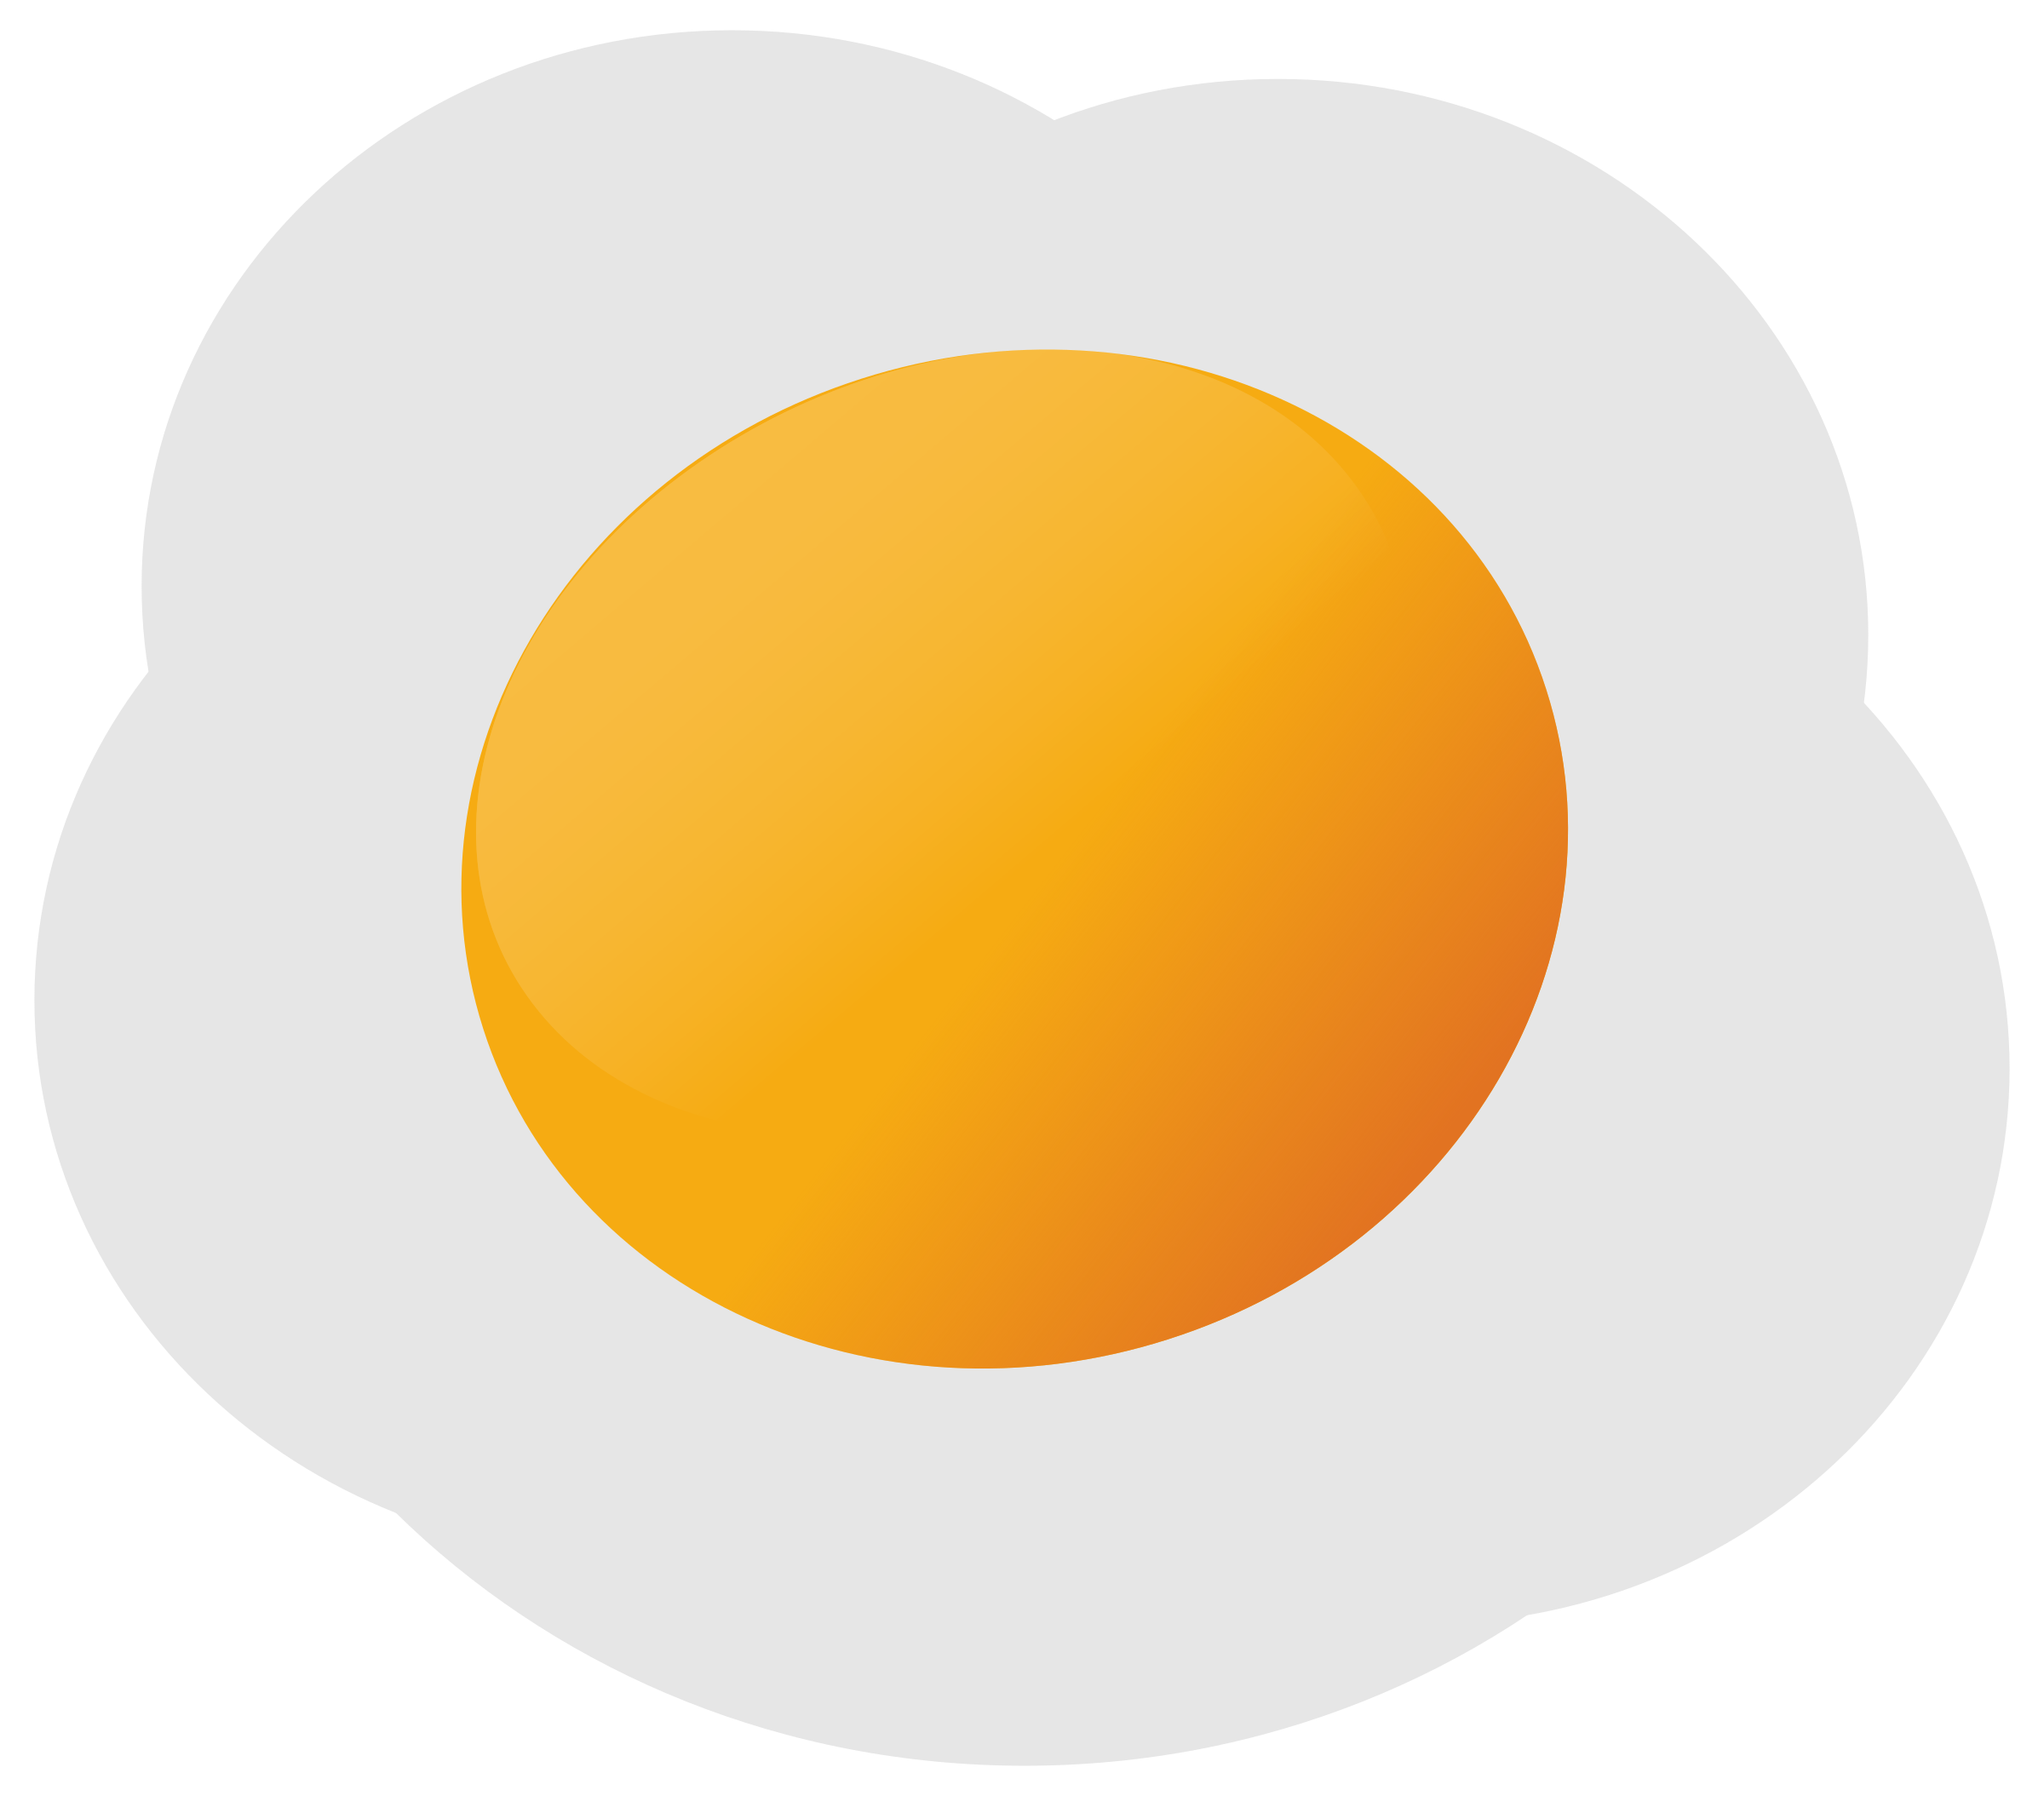 Fried Egg Vector Clipart image